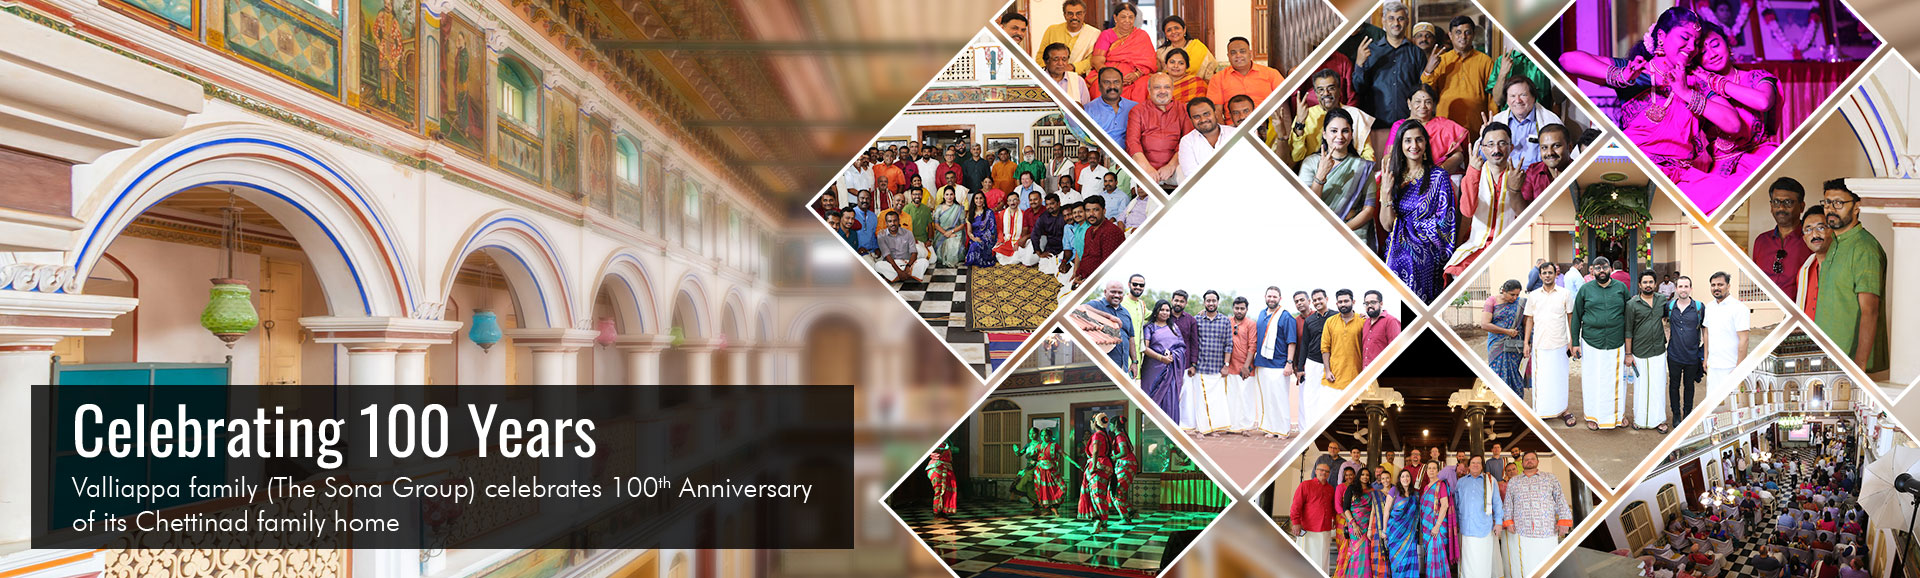 The Sona Group Completes 100 glorious years of entrepreneurship